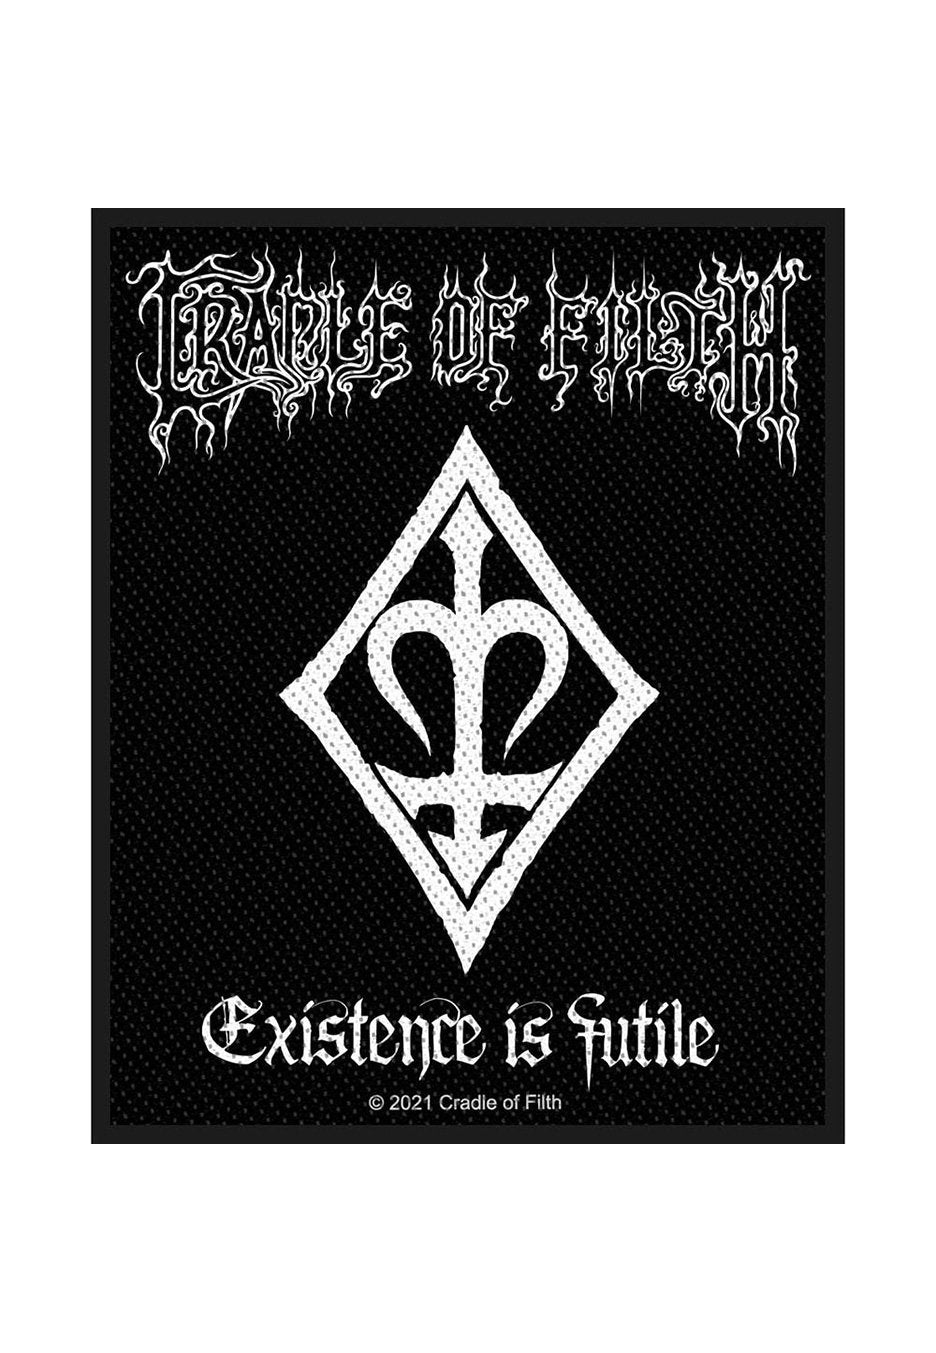 Cradle Of Filth - Existence Is Futile - Patch